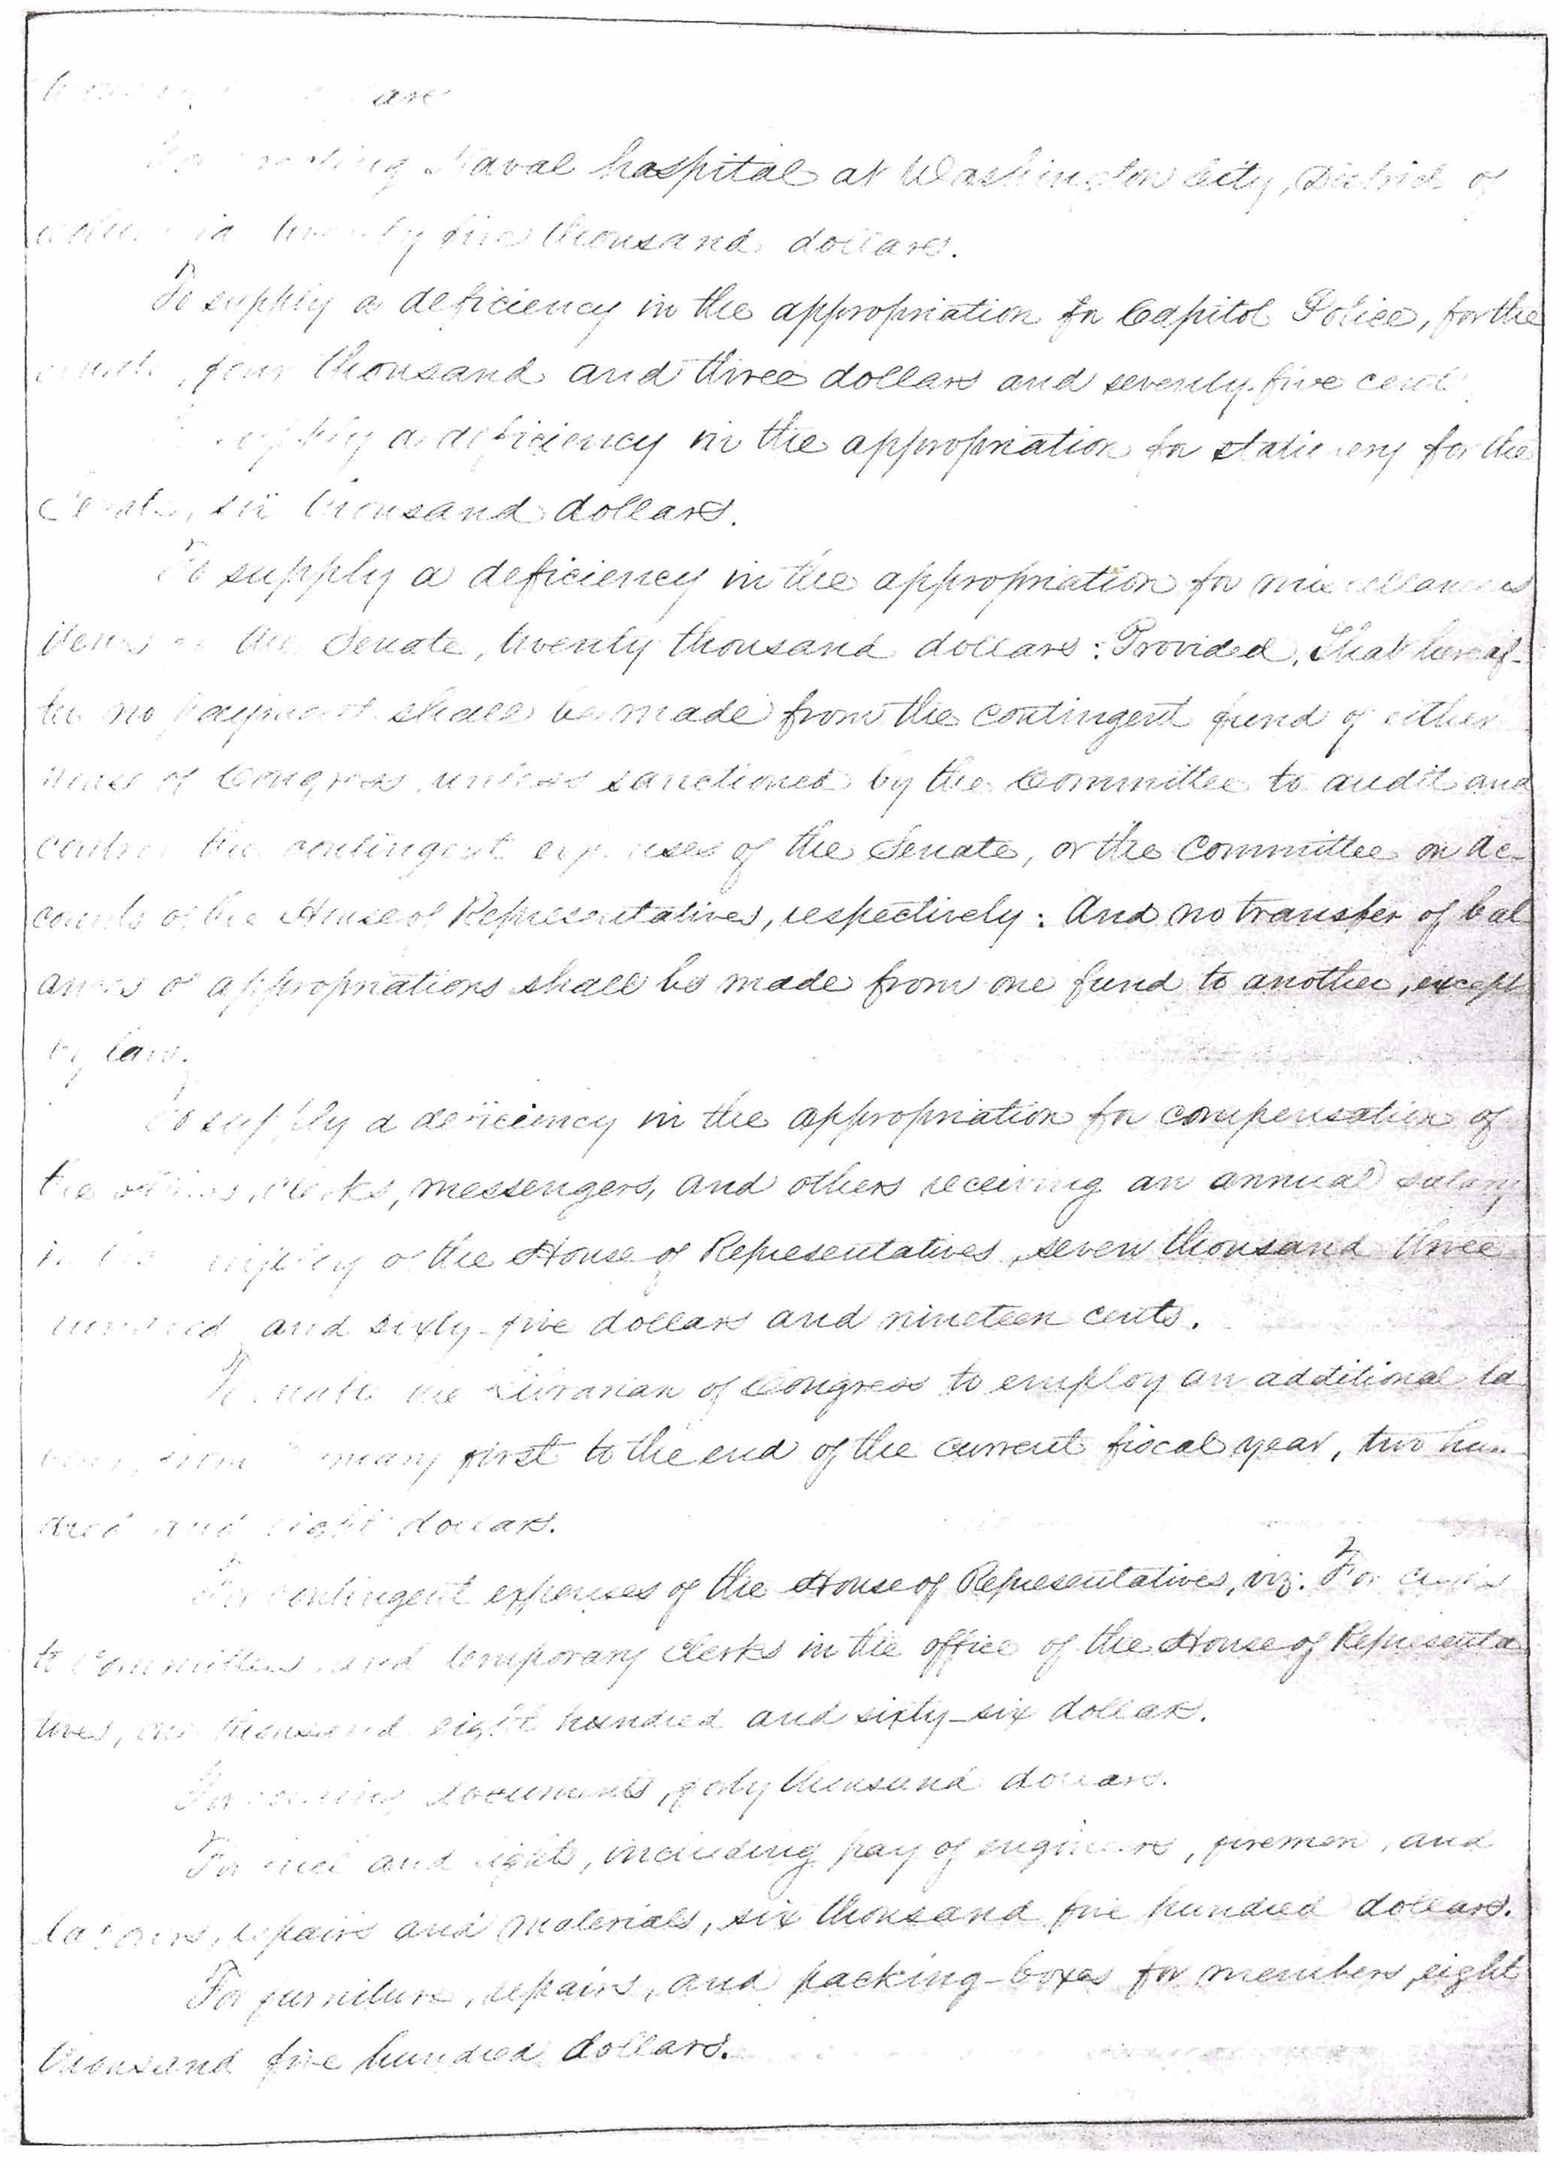 Act of Congress Authorizing Construction of the Washington Naval  Hospital, Page 5 of 7